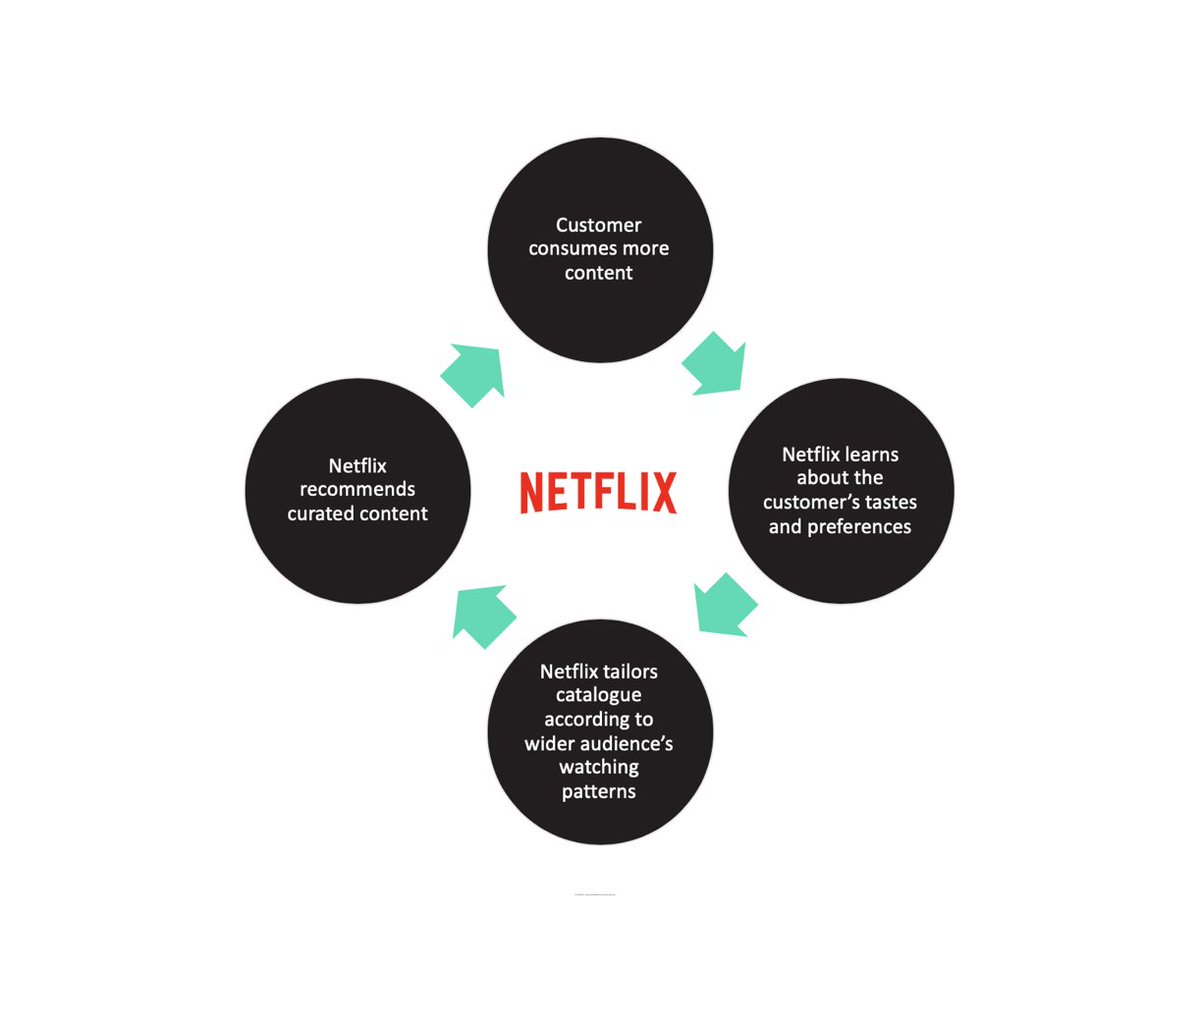 5. Netflix Retention Loop1. Consumer consumes content2. Netflix uses behavioral data to determine preferences3. Netflix curates a catalog relative to watching patterns4. They recommend curated content